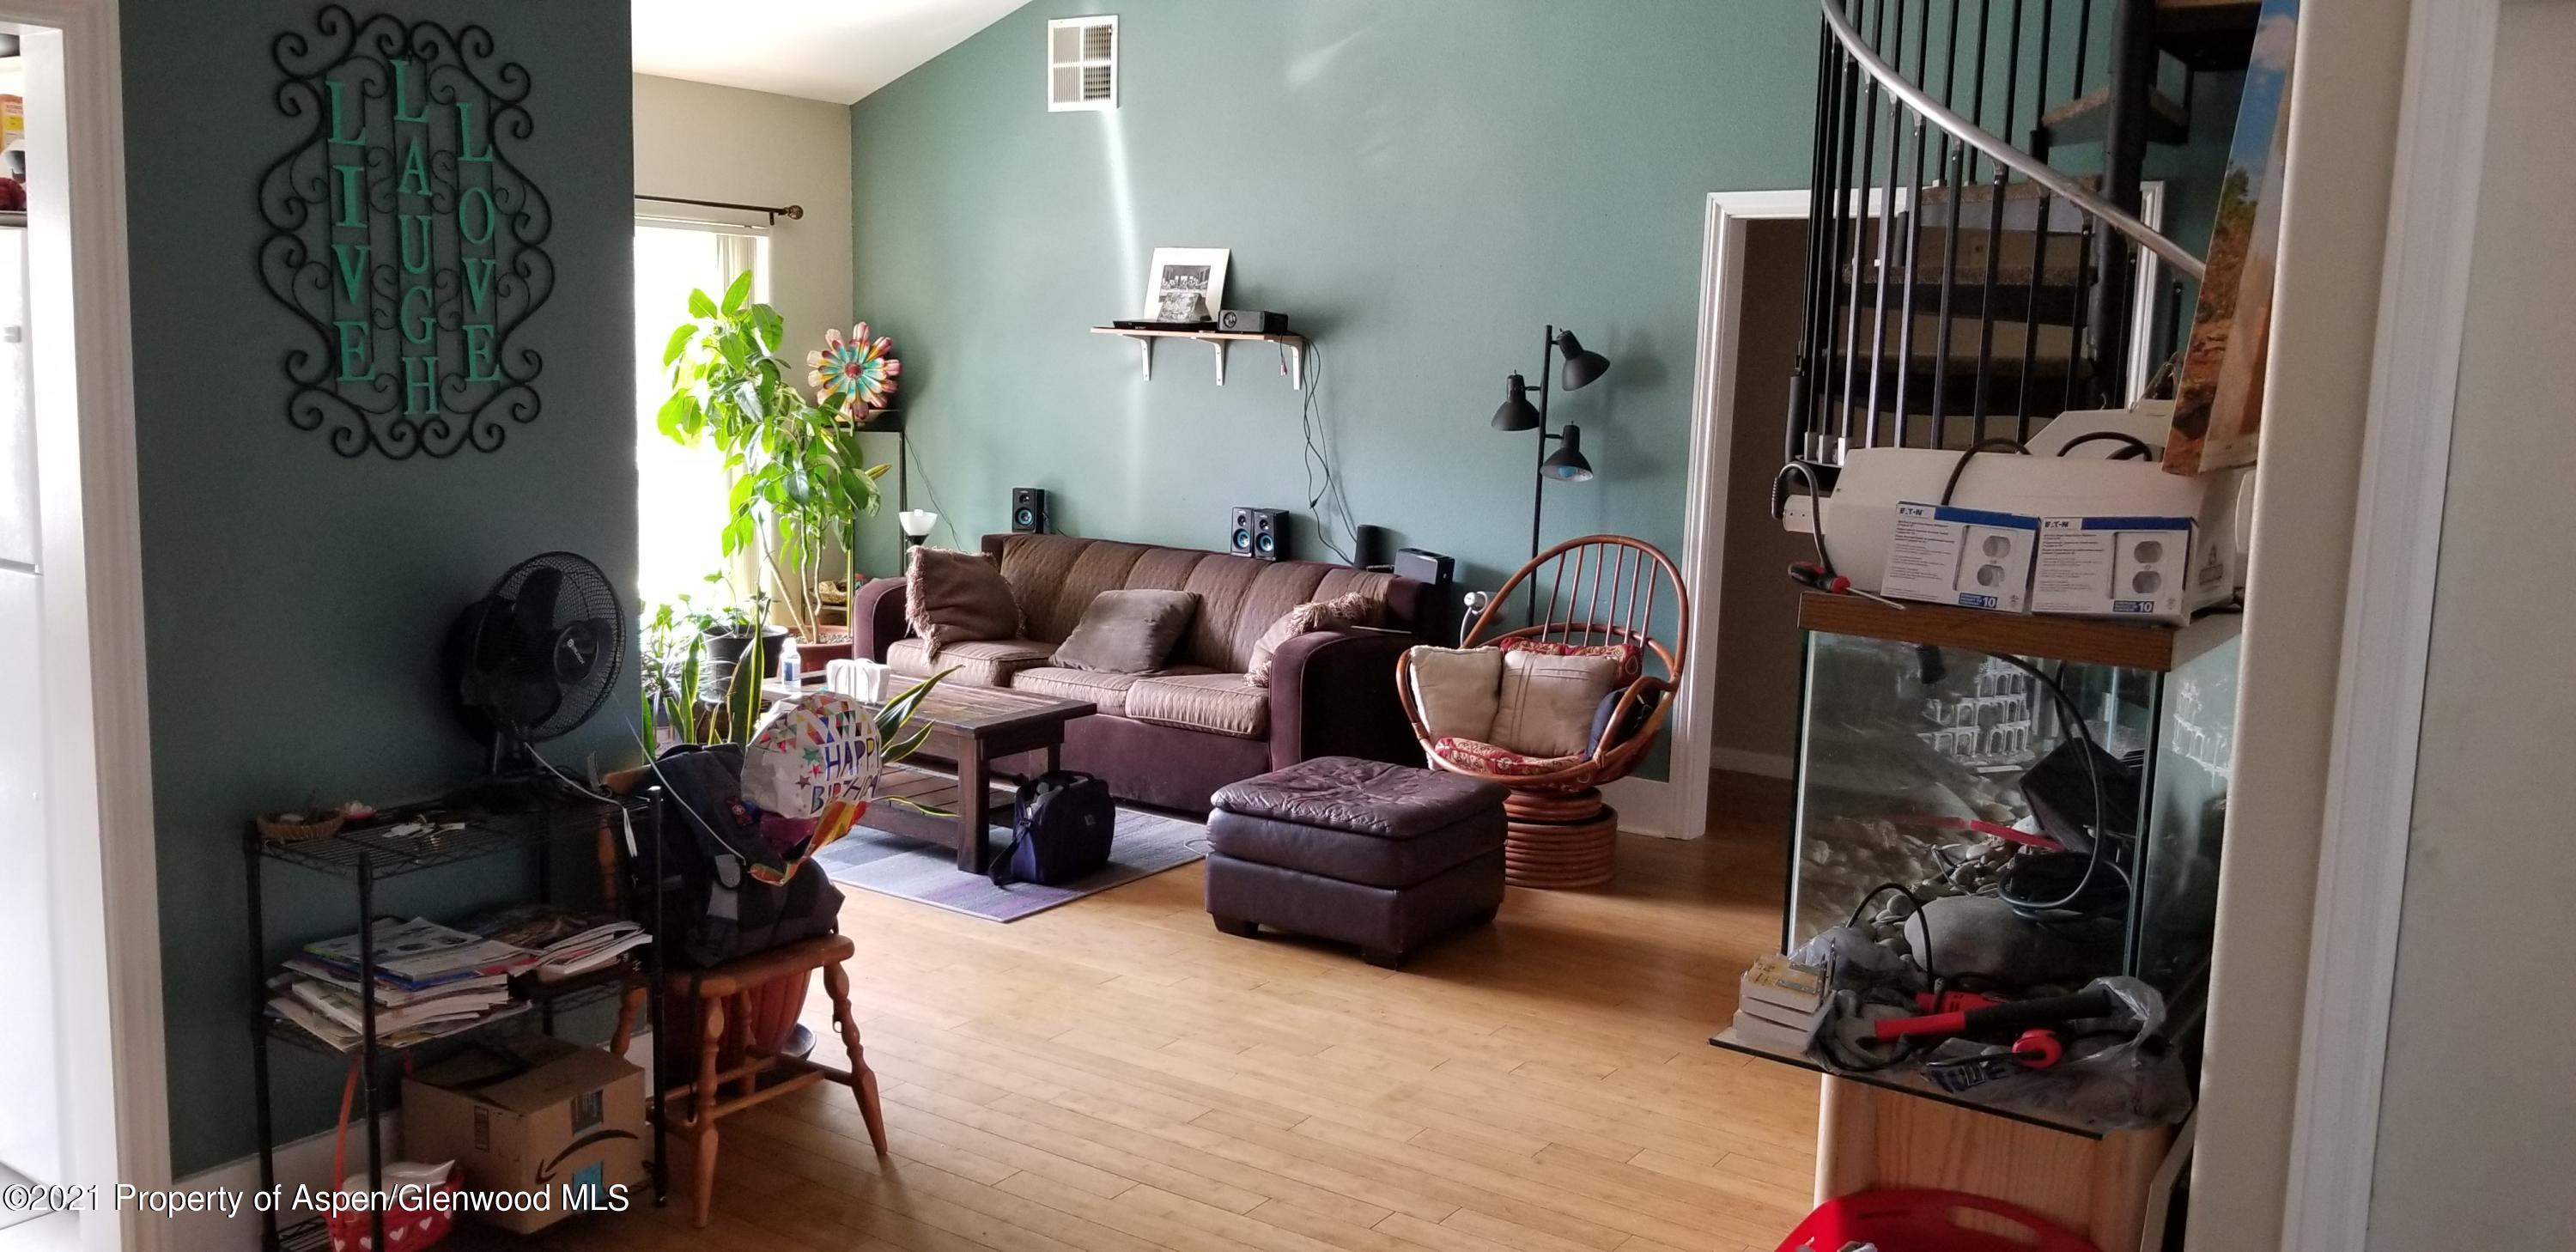 a living room with furniture and a potted plant